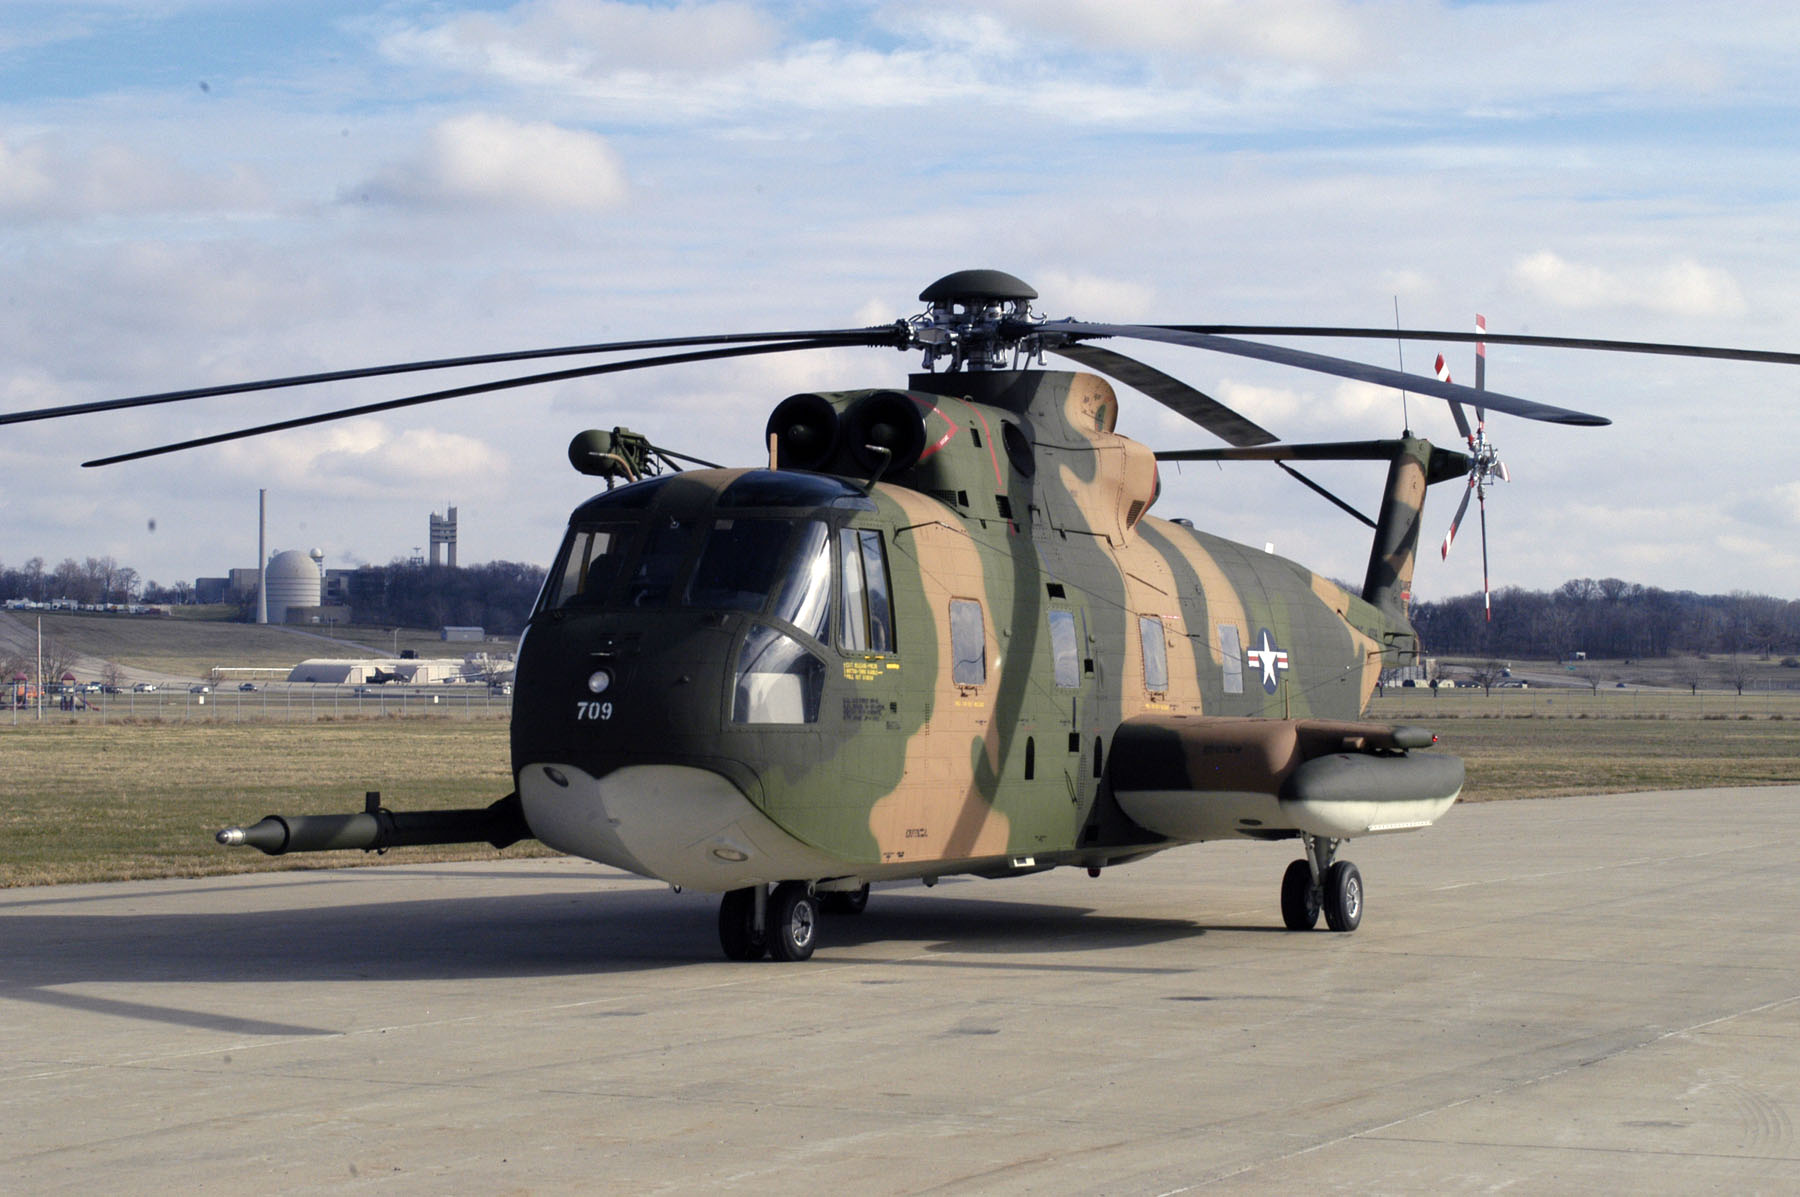 Sikorsky HH-3E Jolly Green Giant 67-14709 at the National Museum of the United States Air Force, Wright-Patterson Air Force Base, Ohio. (U.S. Air Force)